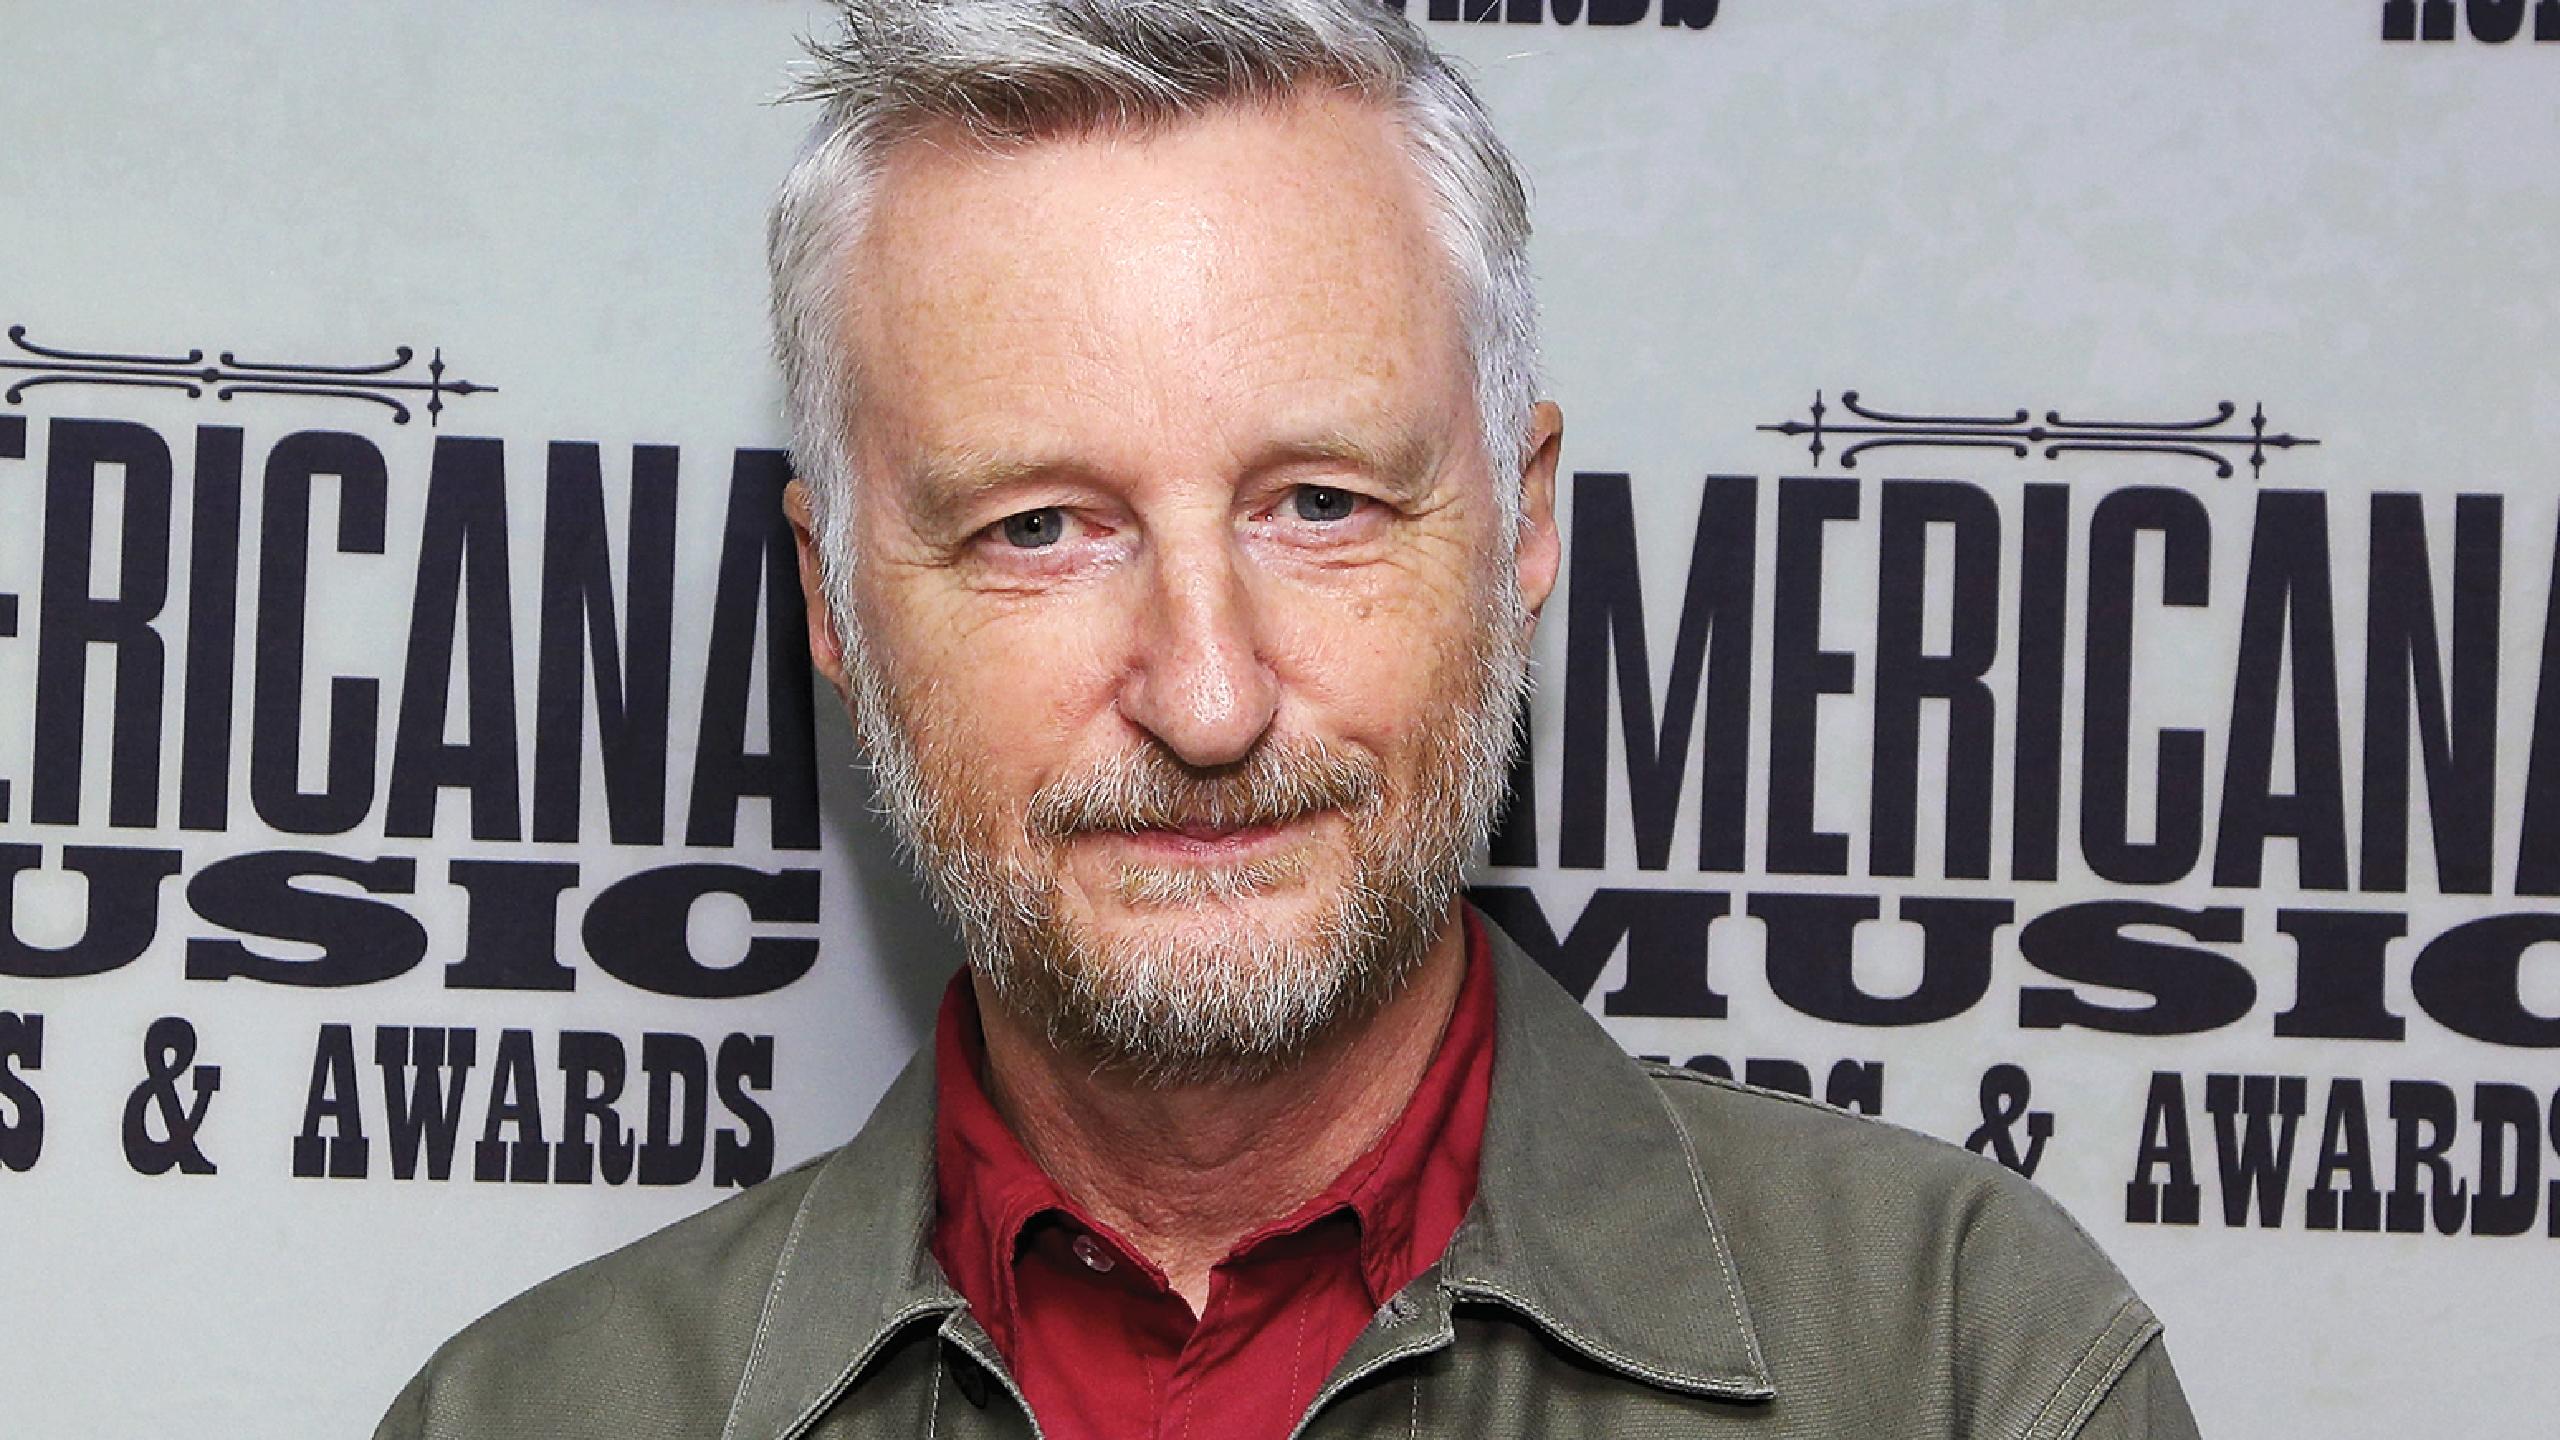 Billy Bragg Tickets Concerts and Tours 2023 2024 Wegow